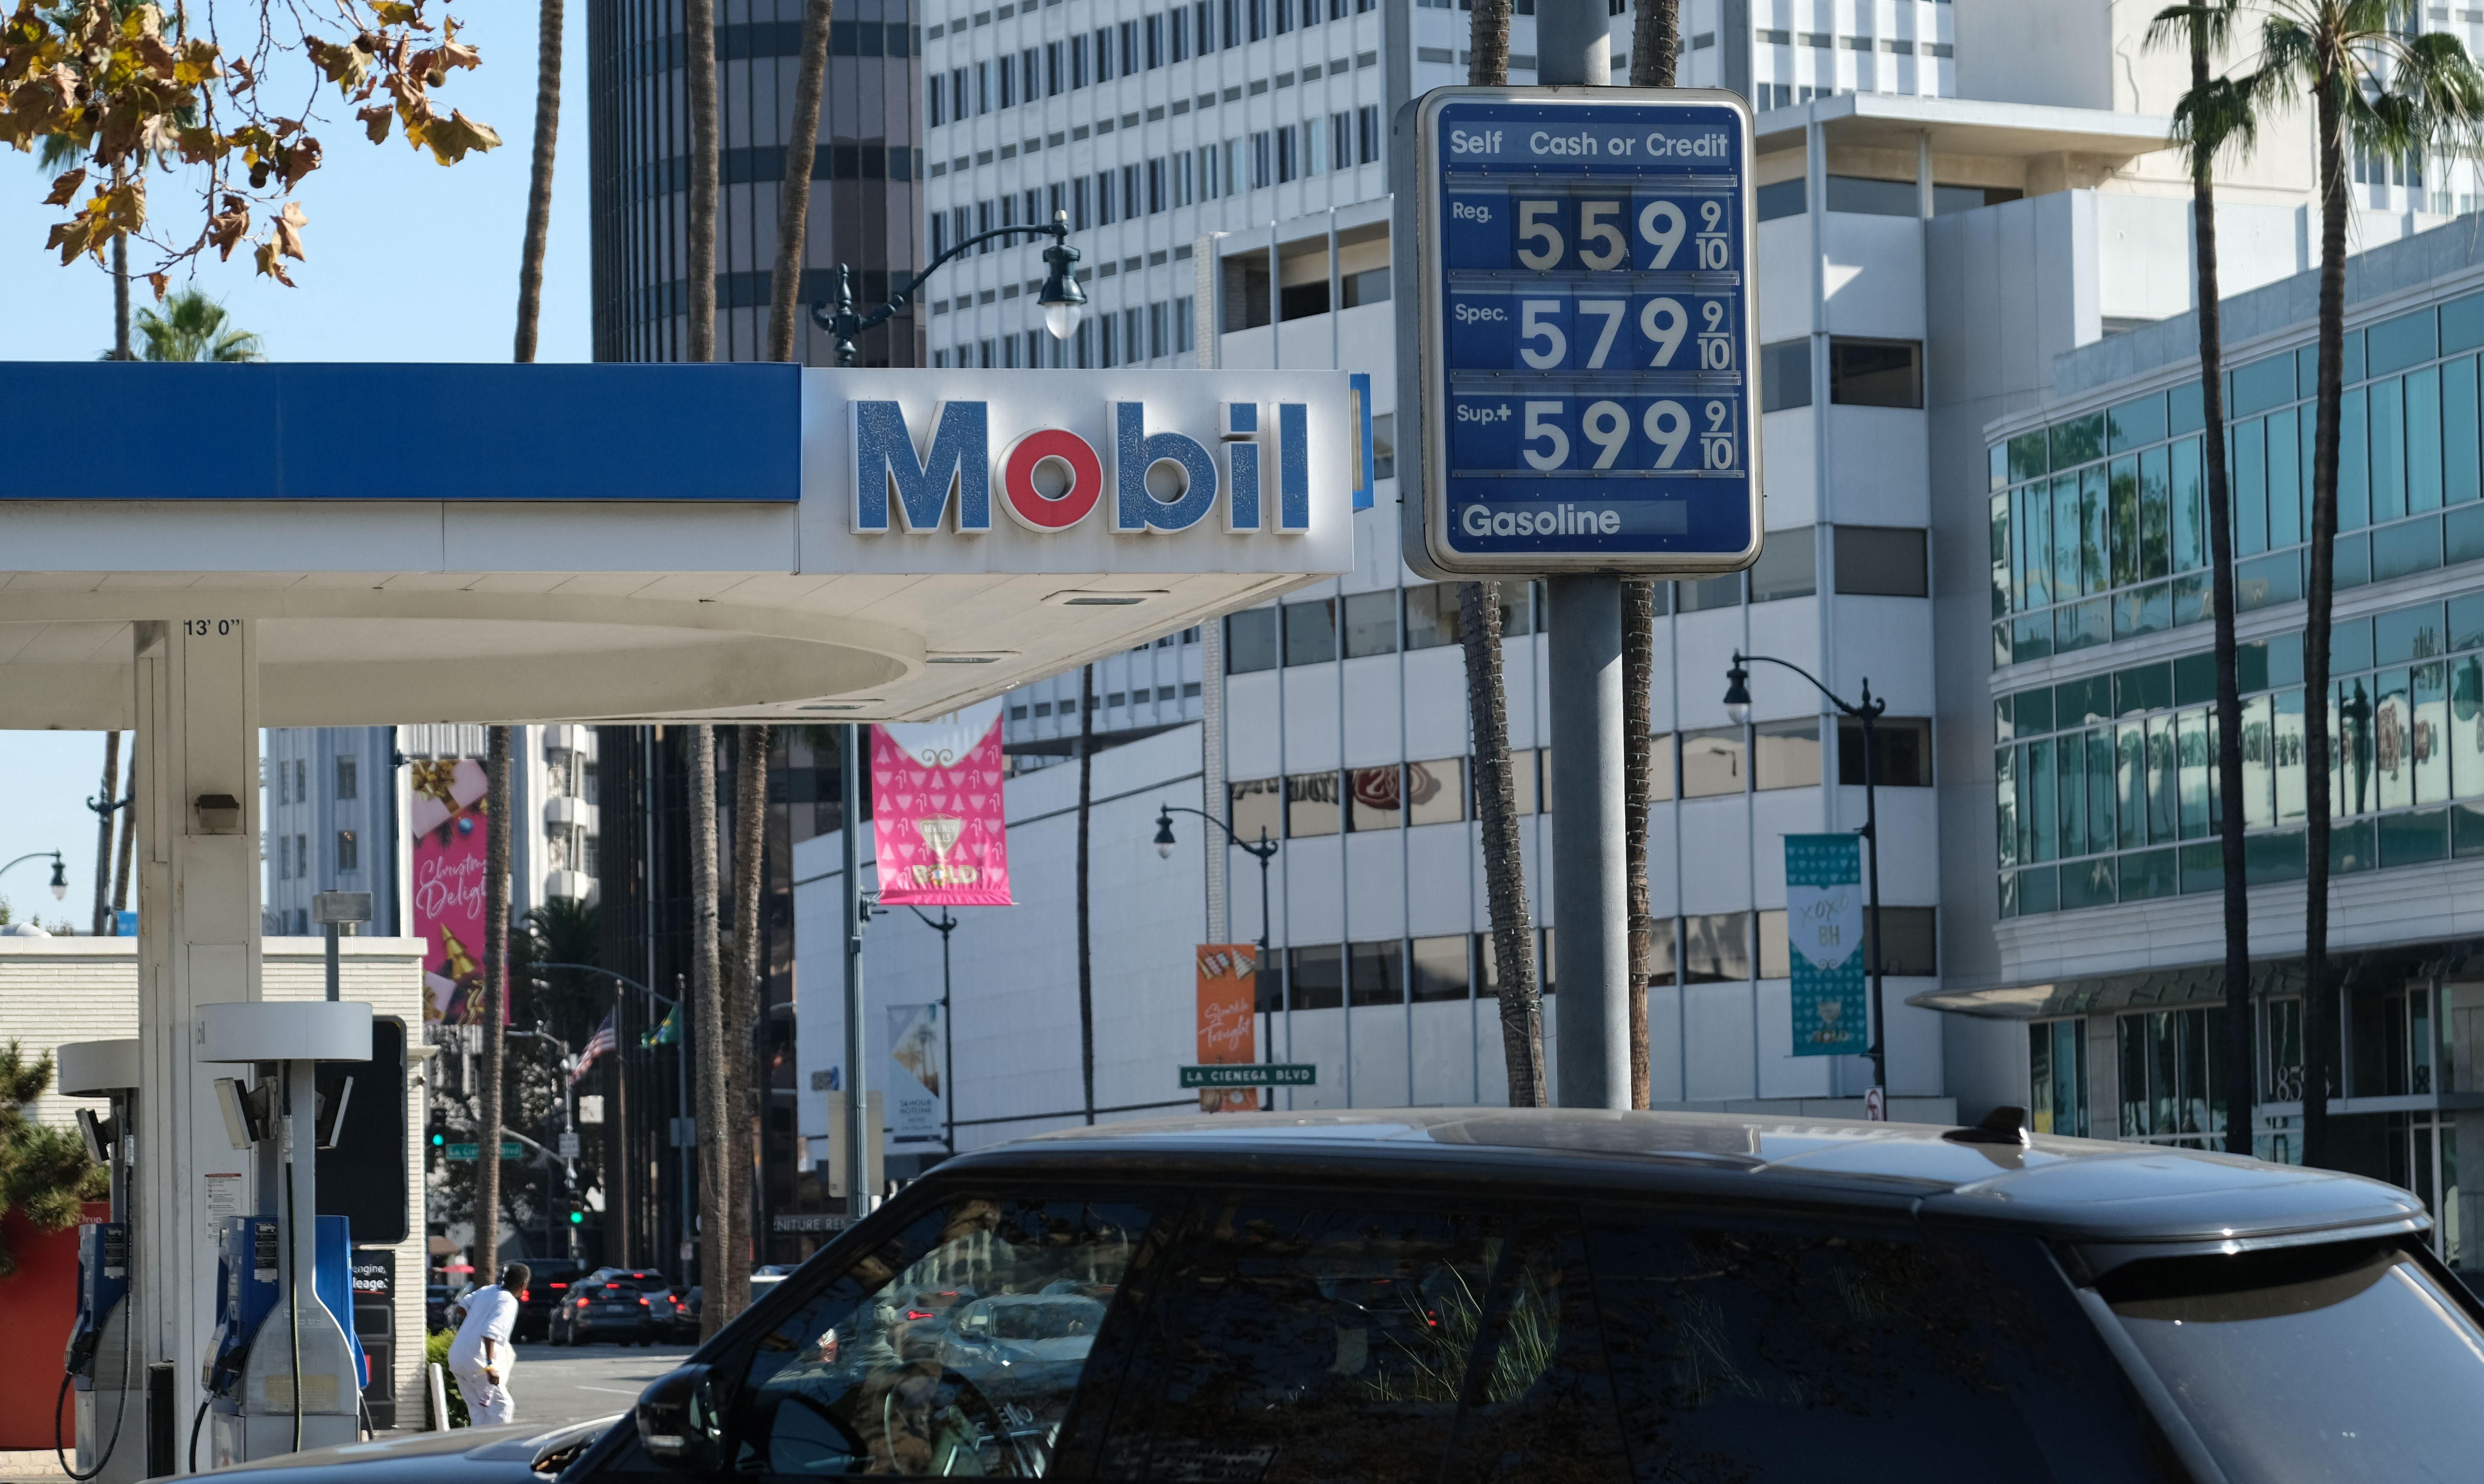 The high price of gasoline is displayed at a Los Angeles gas station on November 24, 2021